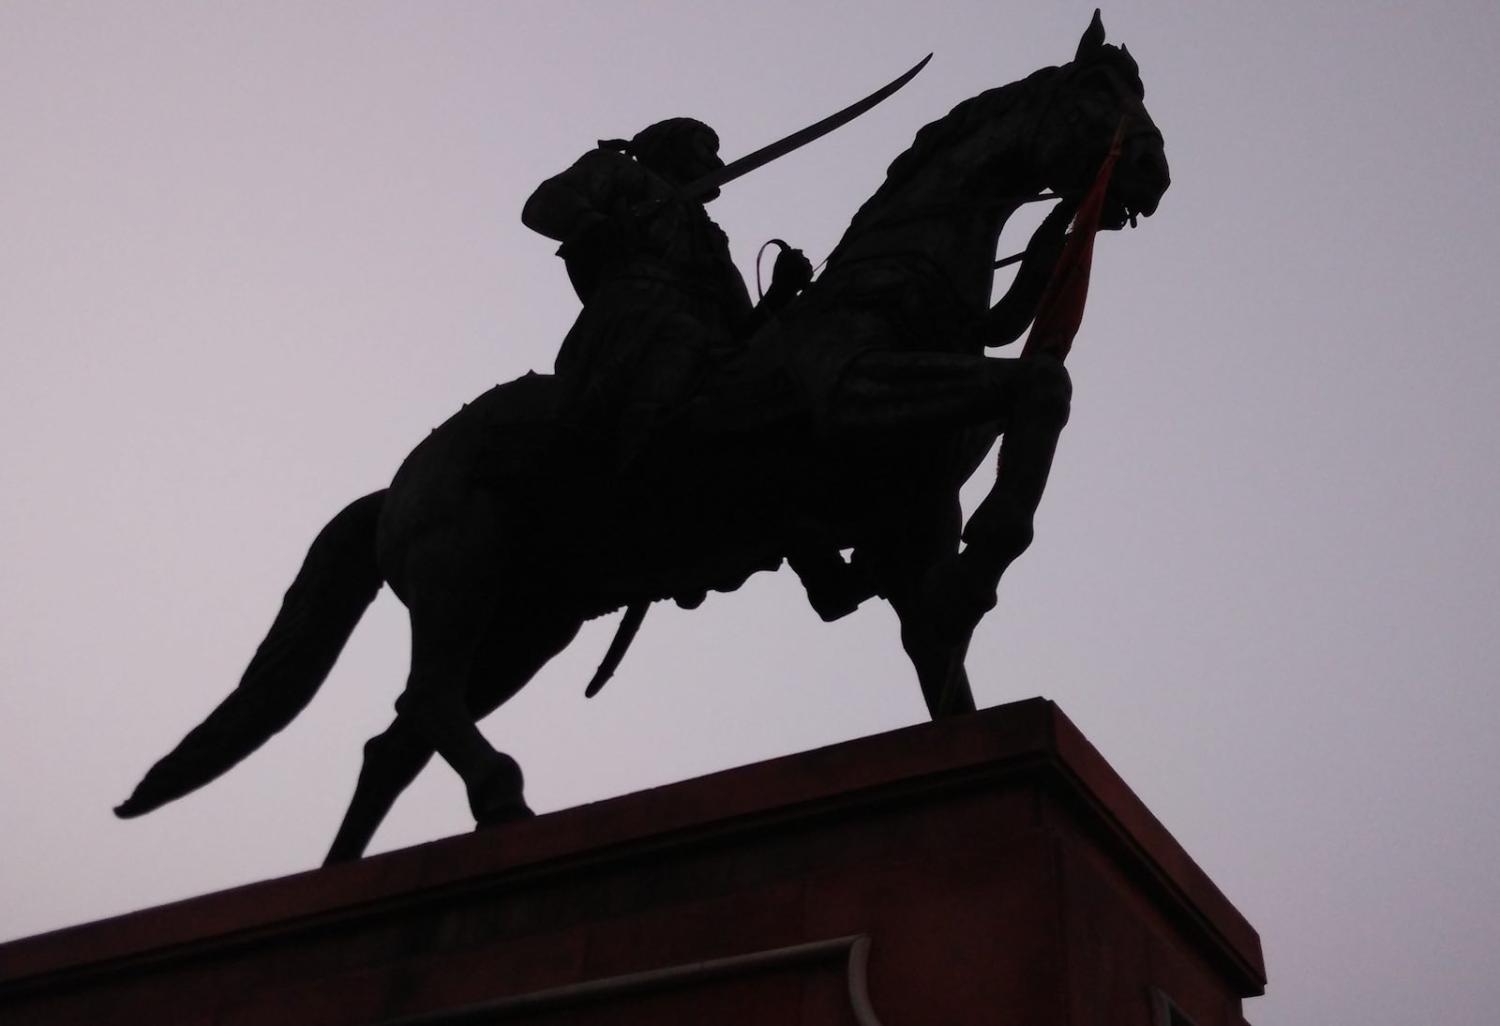 An existing statue of Shivaji Maharaj in Agra, similar in style to the much larger version planned off the coast of Mumbai (Photo: Wikimedia Commons)